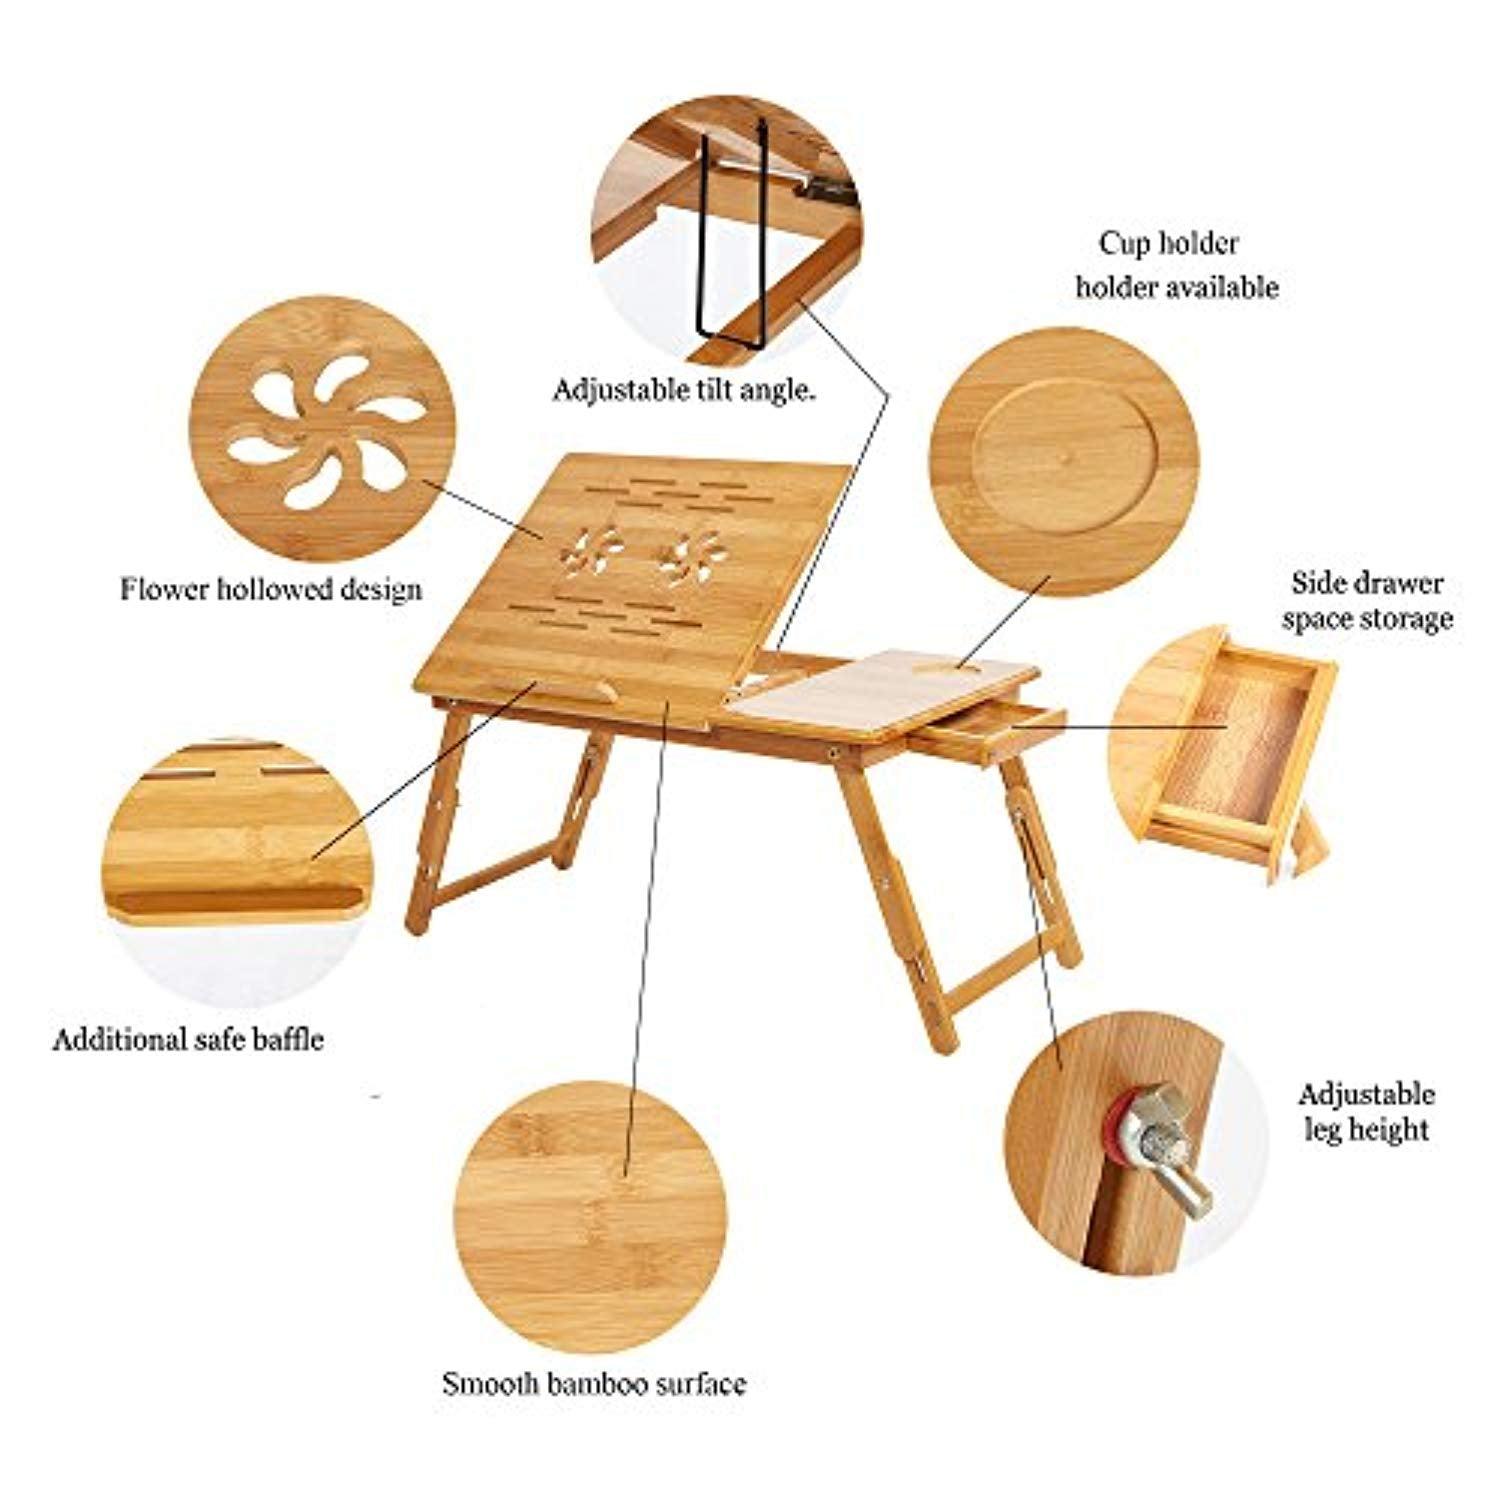 Bosonshop Adjustable Bamboo Laptop Desk Foldable Breakfast Table with Tilting Top Drawer,Eco Friendly